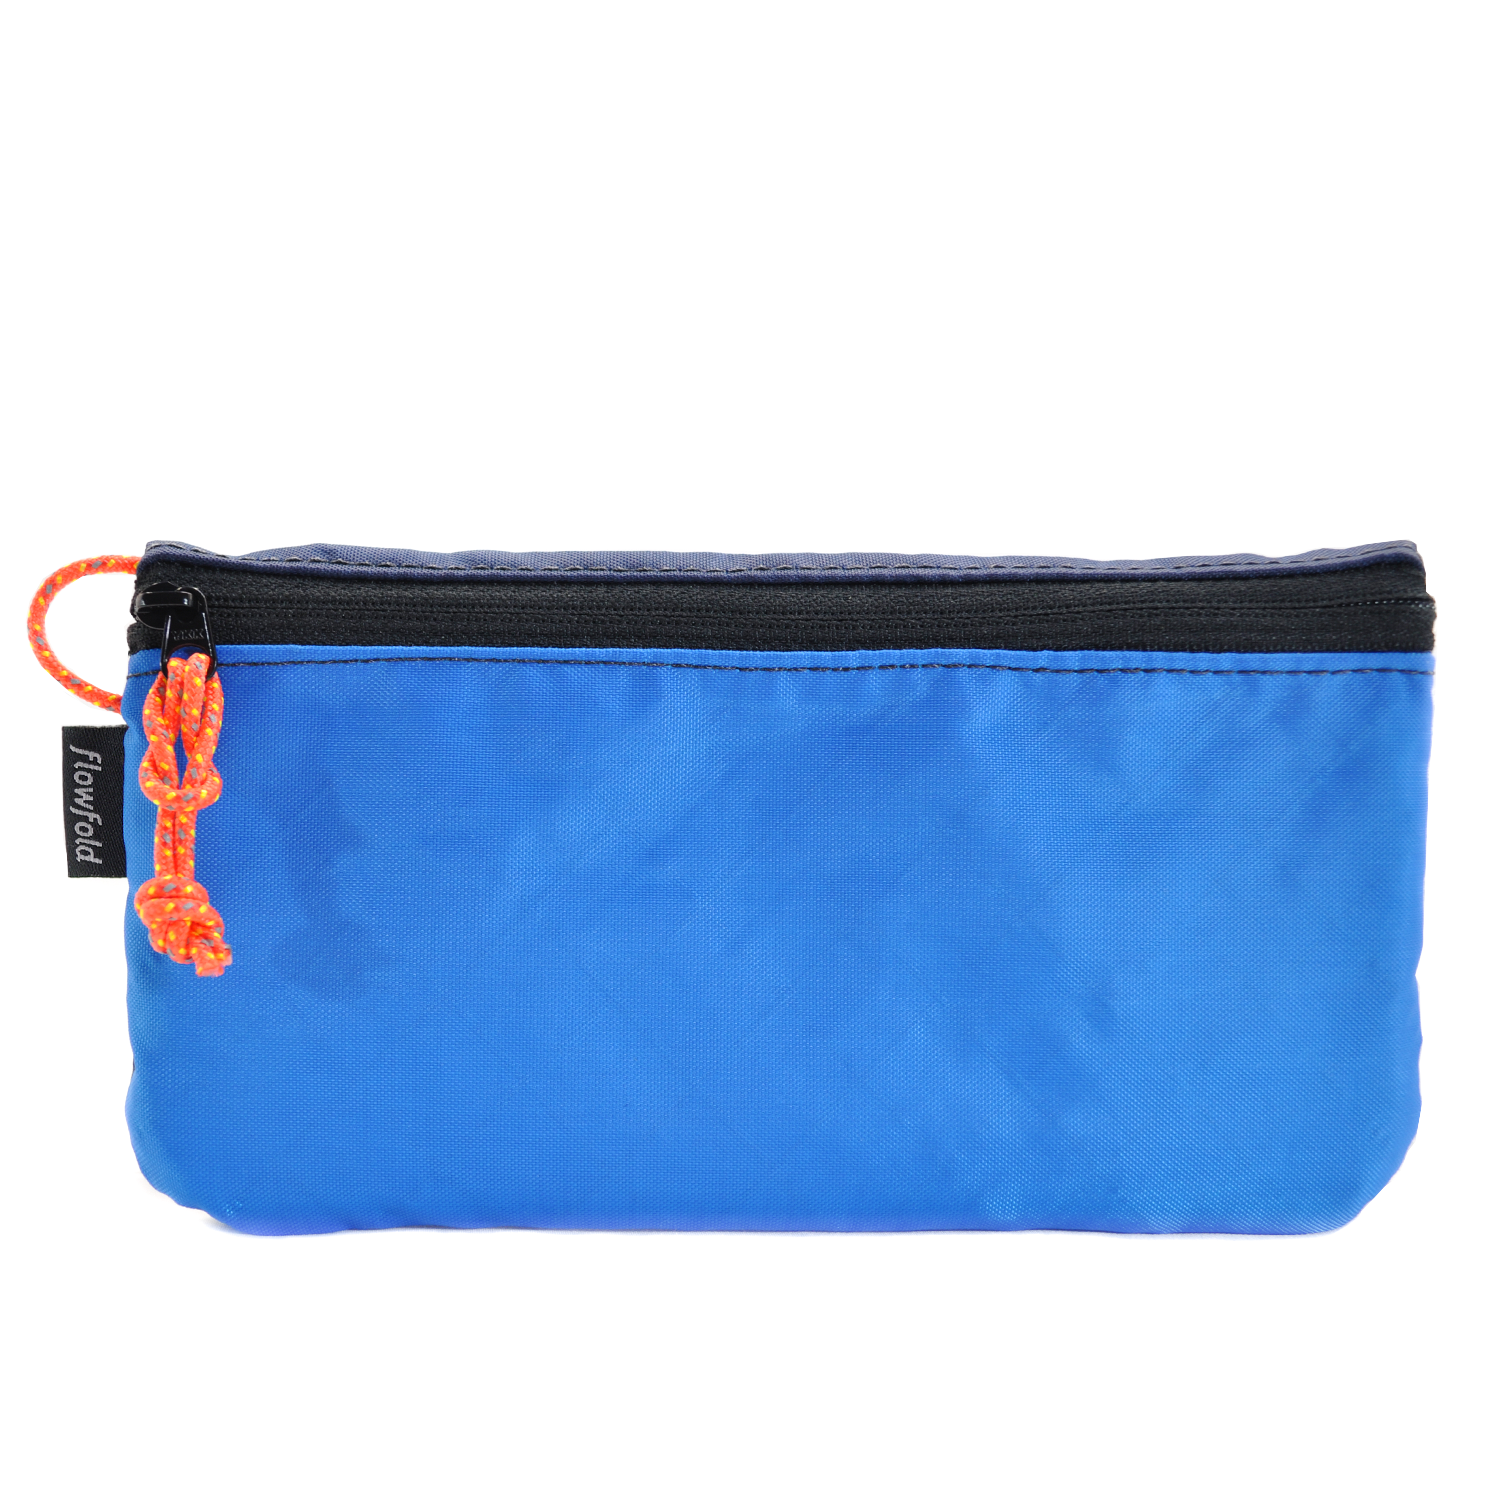 Flowfold Creator Large Zippered Women's Wallet For Cash, Cards, and Phone Bahama Navy